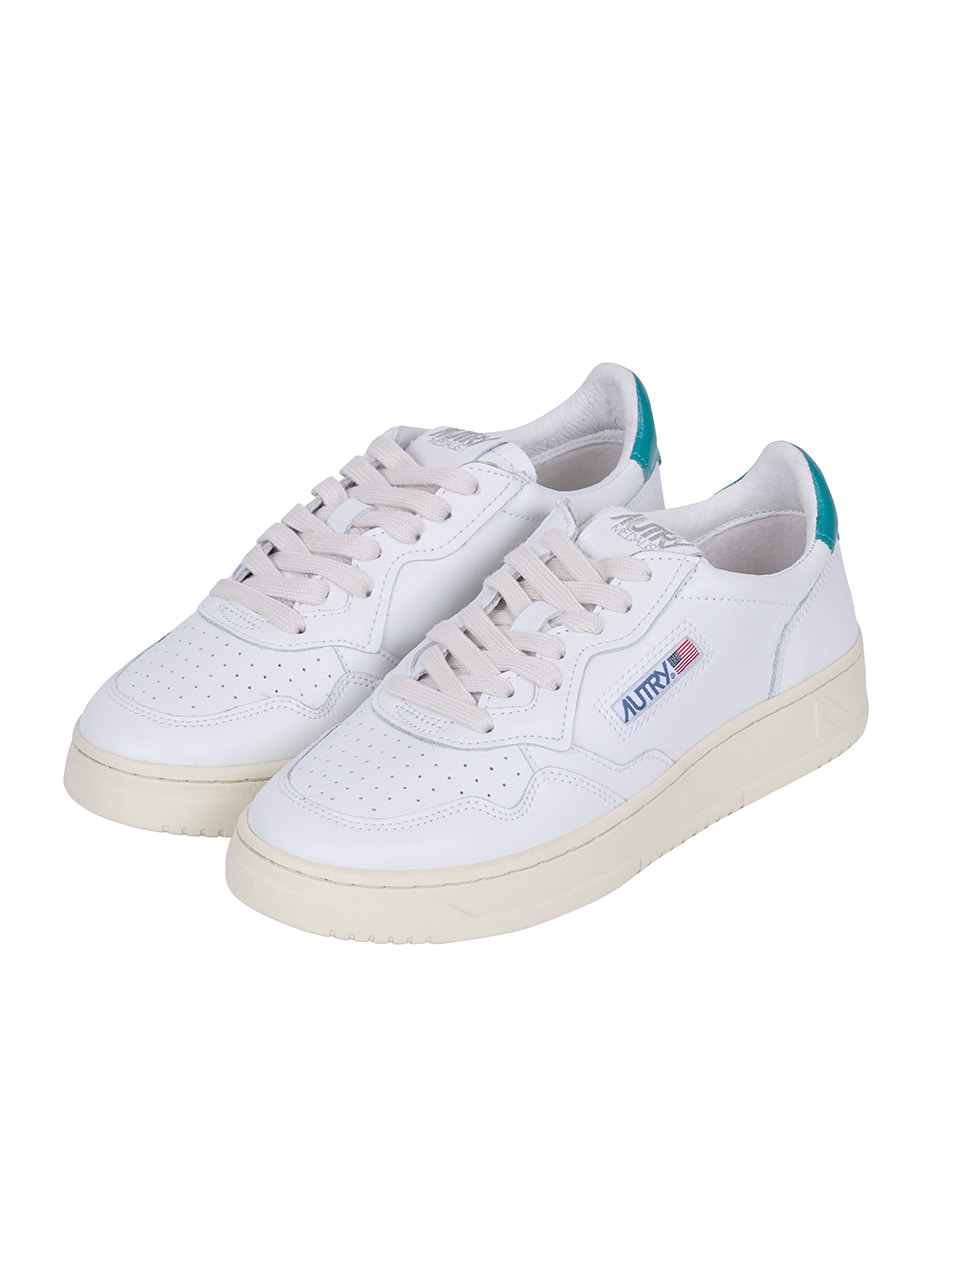 AUTRY - MEDALIST LEATHER SNEAKERS (WHITE/PETROL)